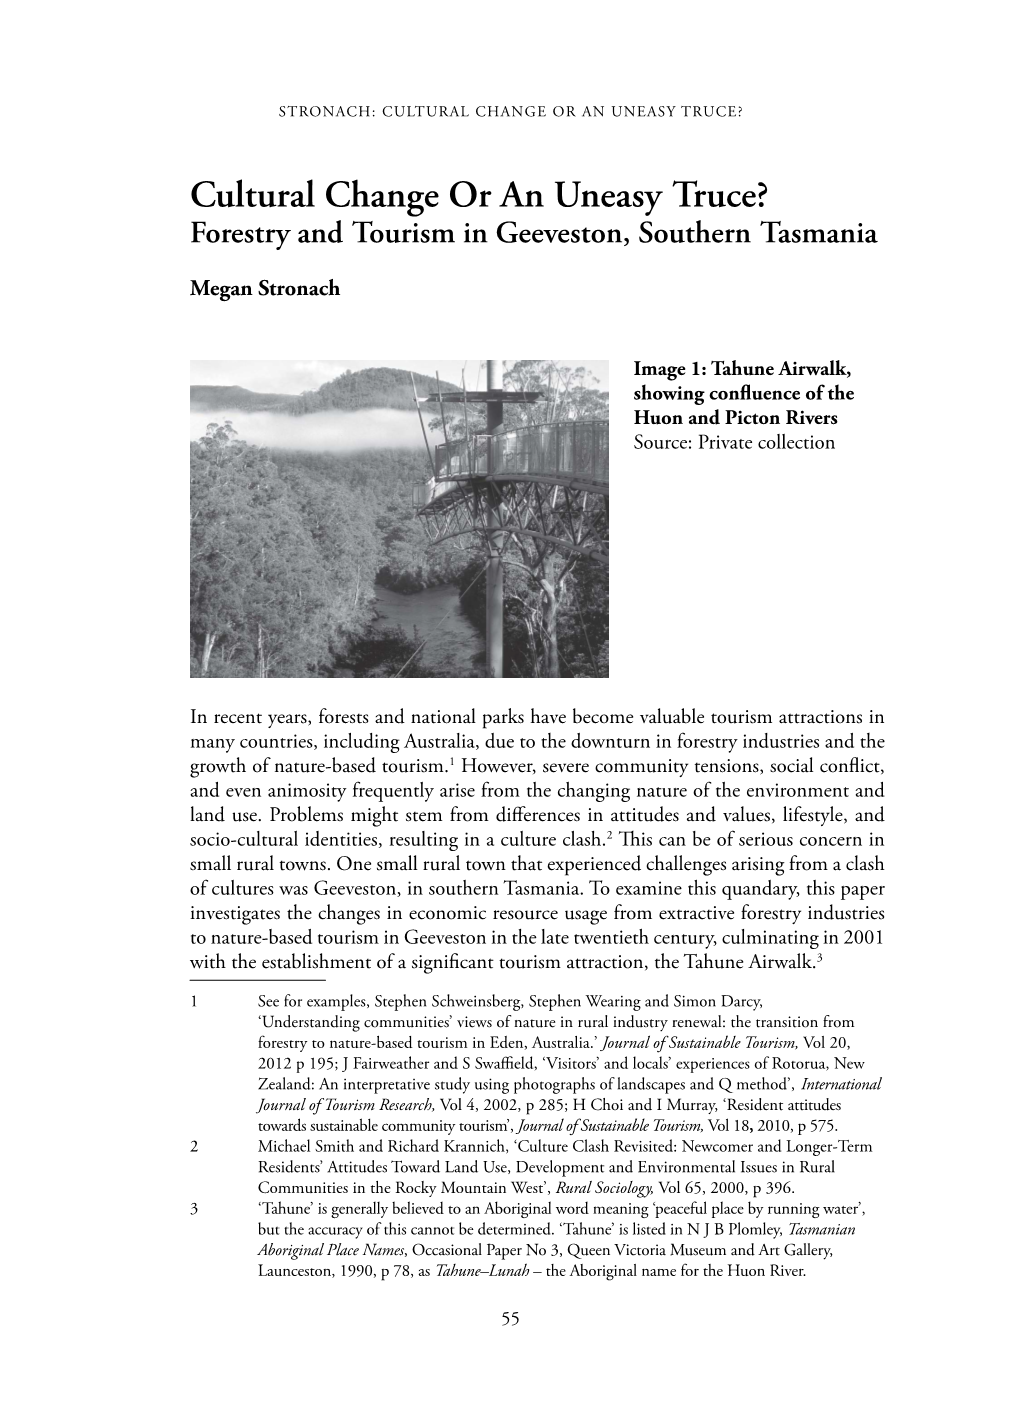 Cultural Change Or an Uneasy Truce? Forestry and Tourism in Geeveston, Southern Tasmania